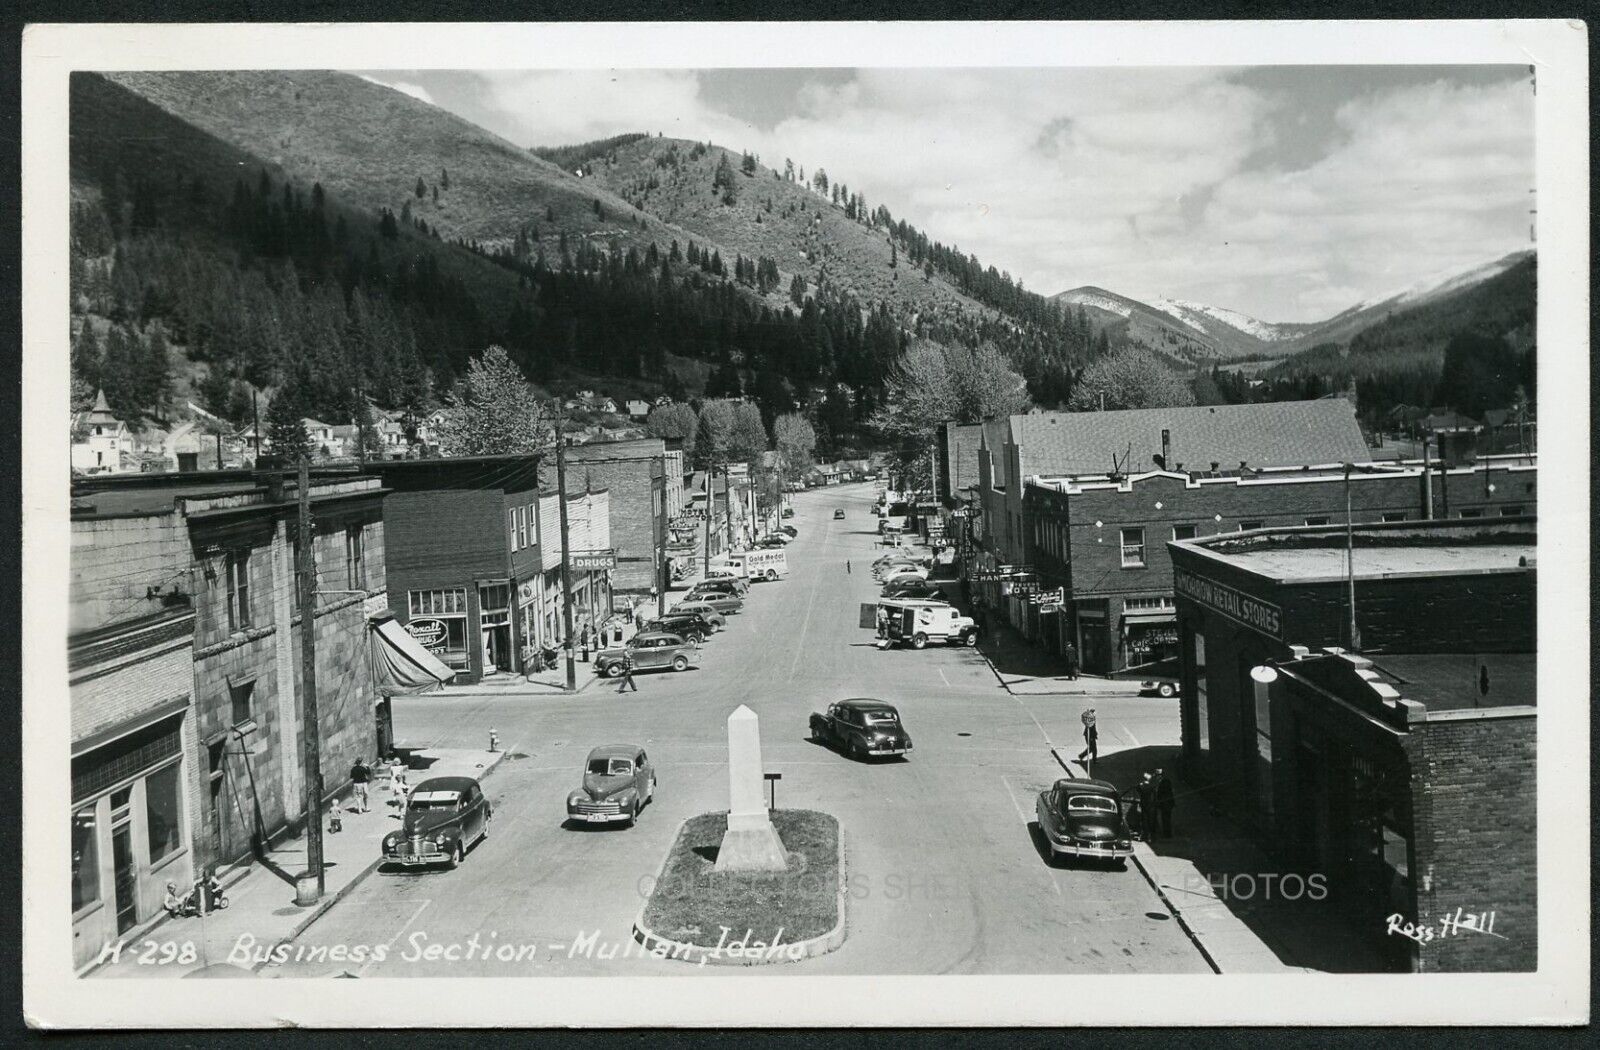 MULLAN IDAHO - BUSINESS SECTION - c1950 RPPC PHOTO POSTCARD by ROSS HALL #H-298